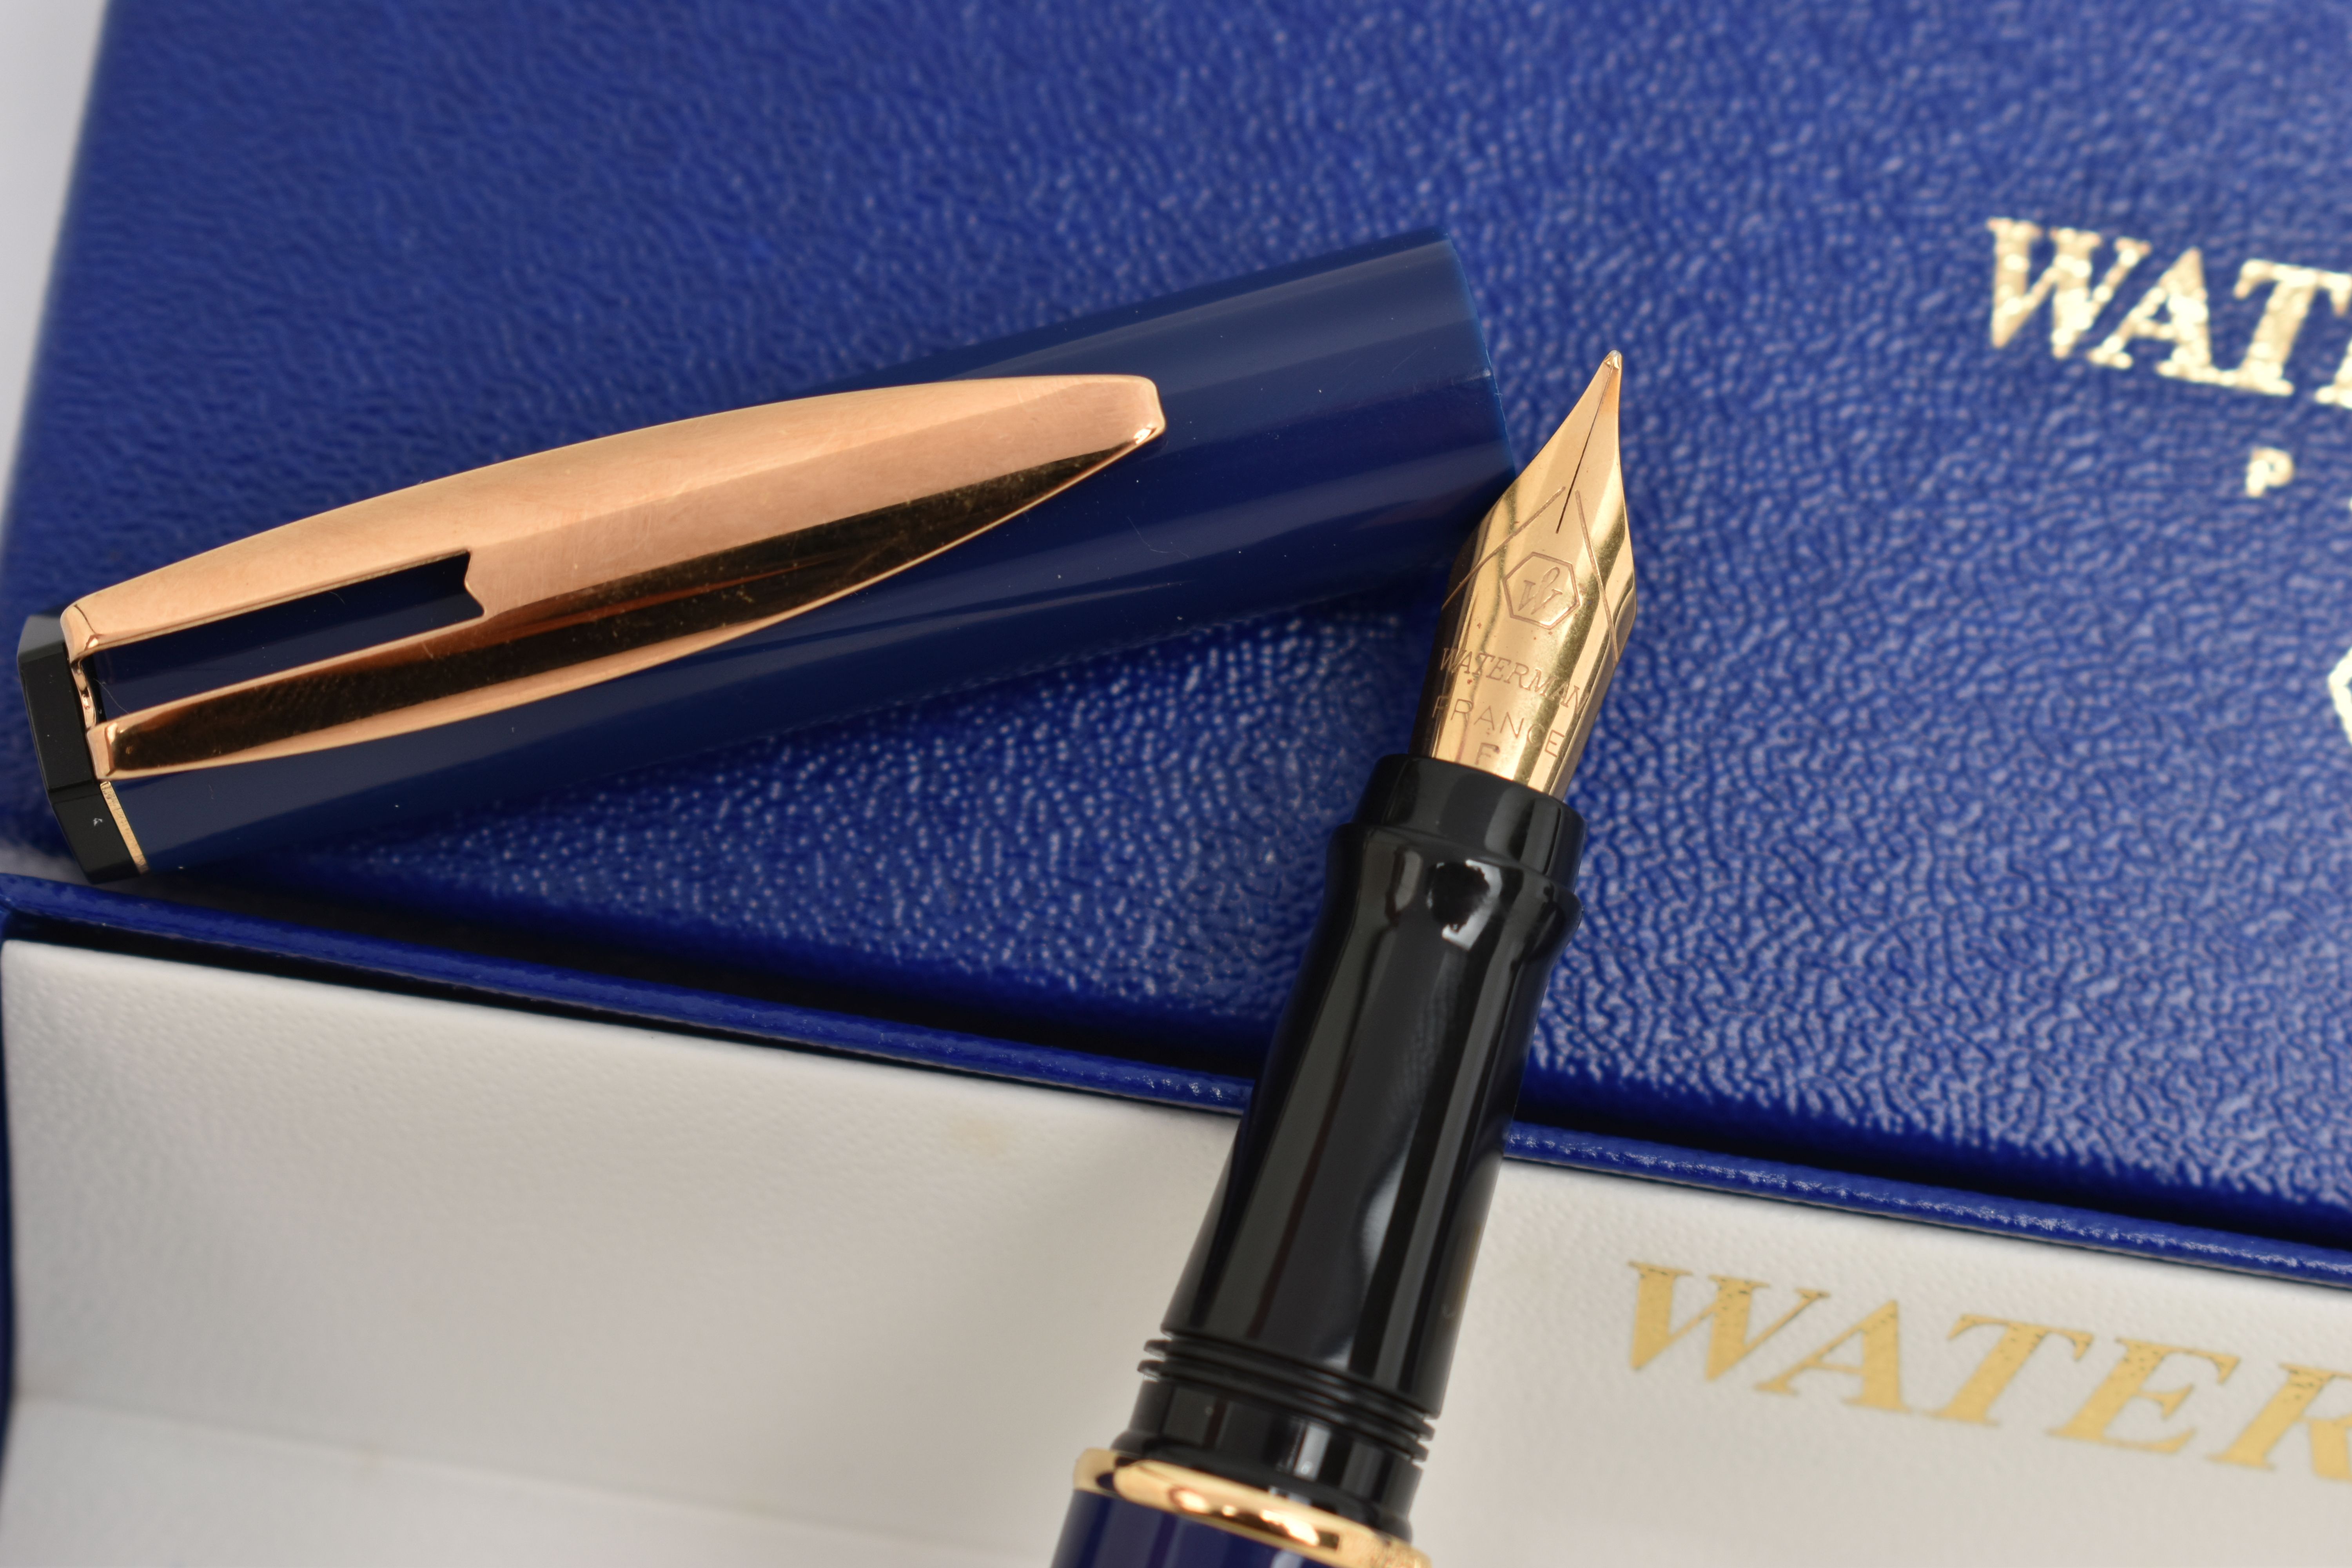 TWO BOXED 'WATERMAN' FOUNTAIN PENS, blue lacquer pens, signed to each collar 'Waterman', both fitted - Image 3 of 5